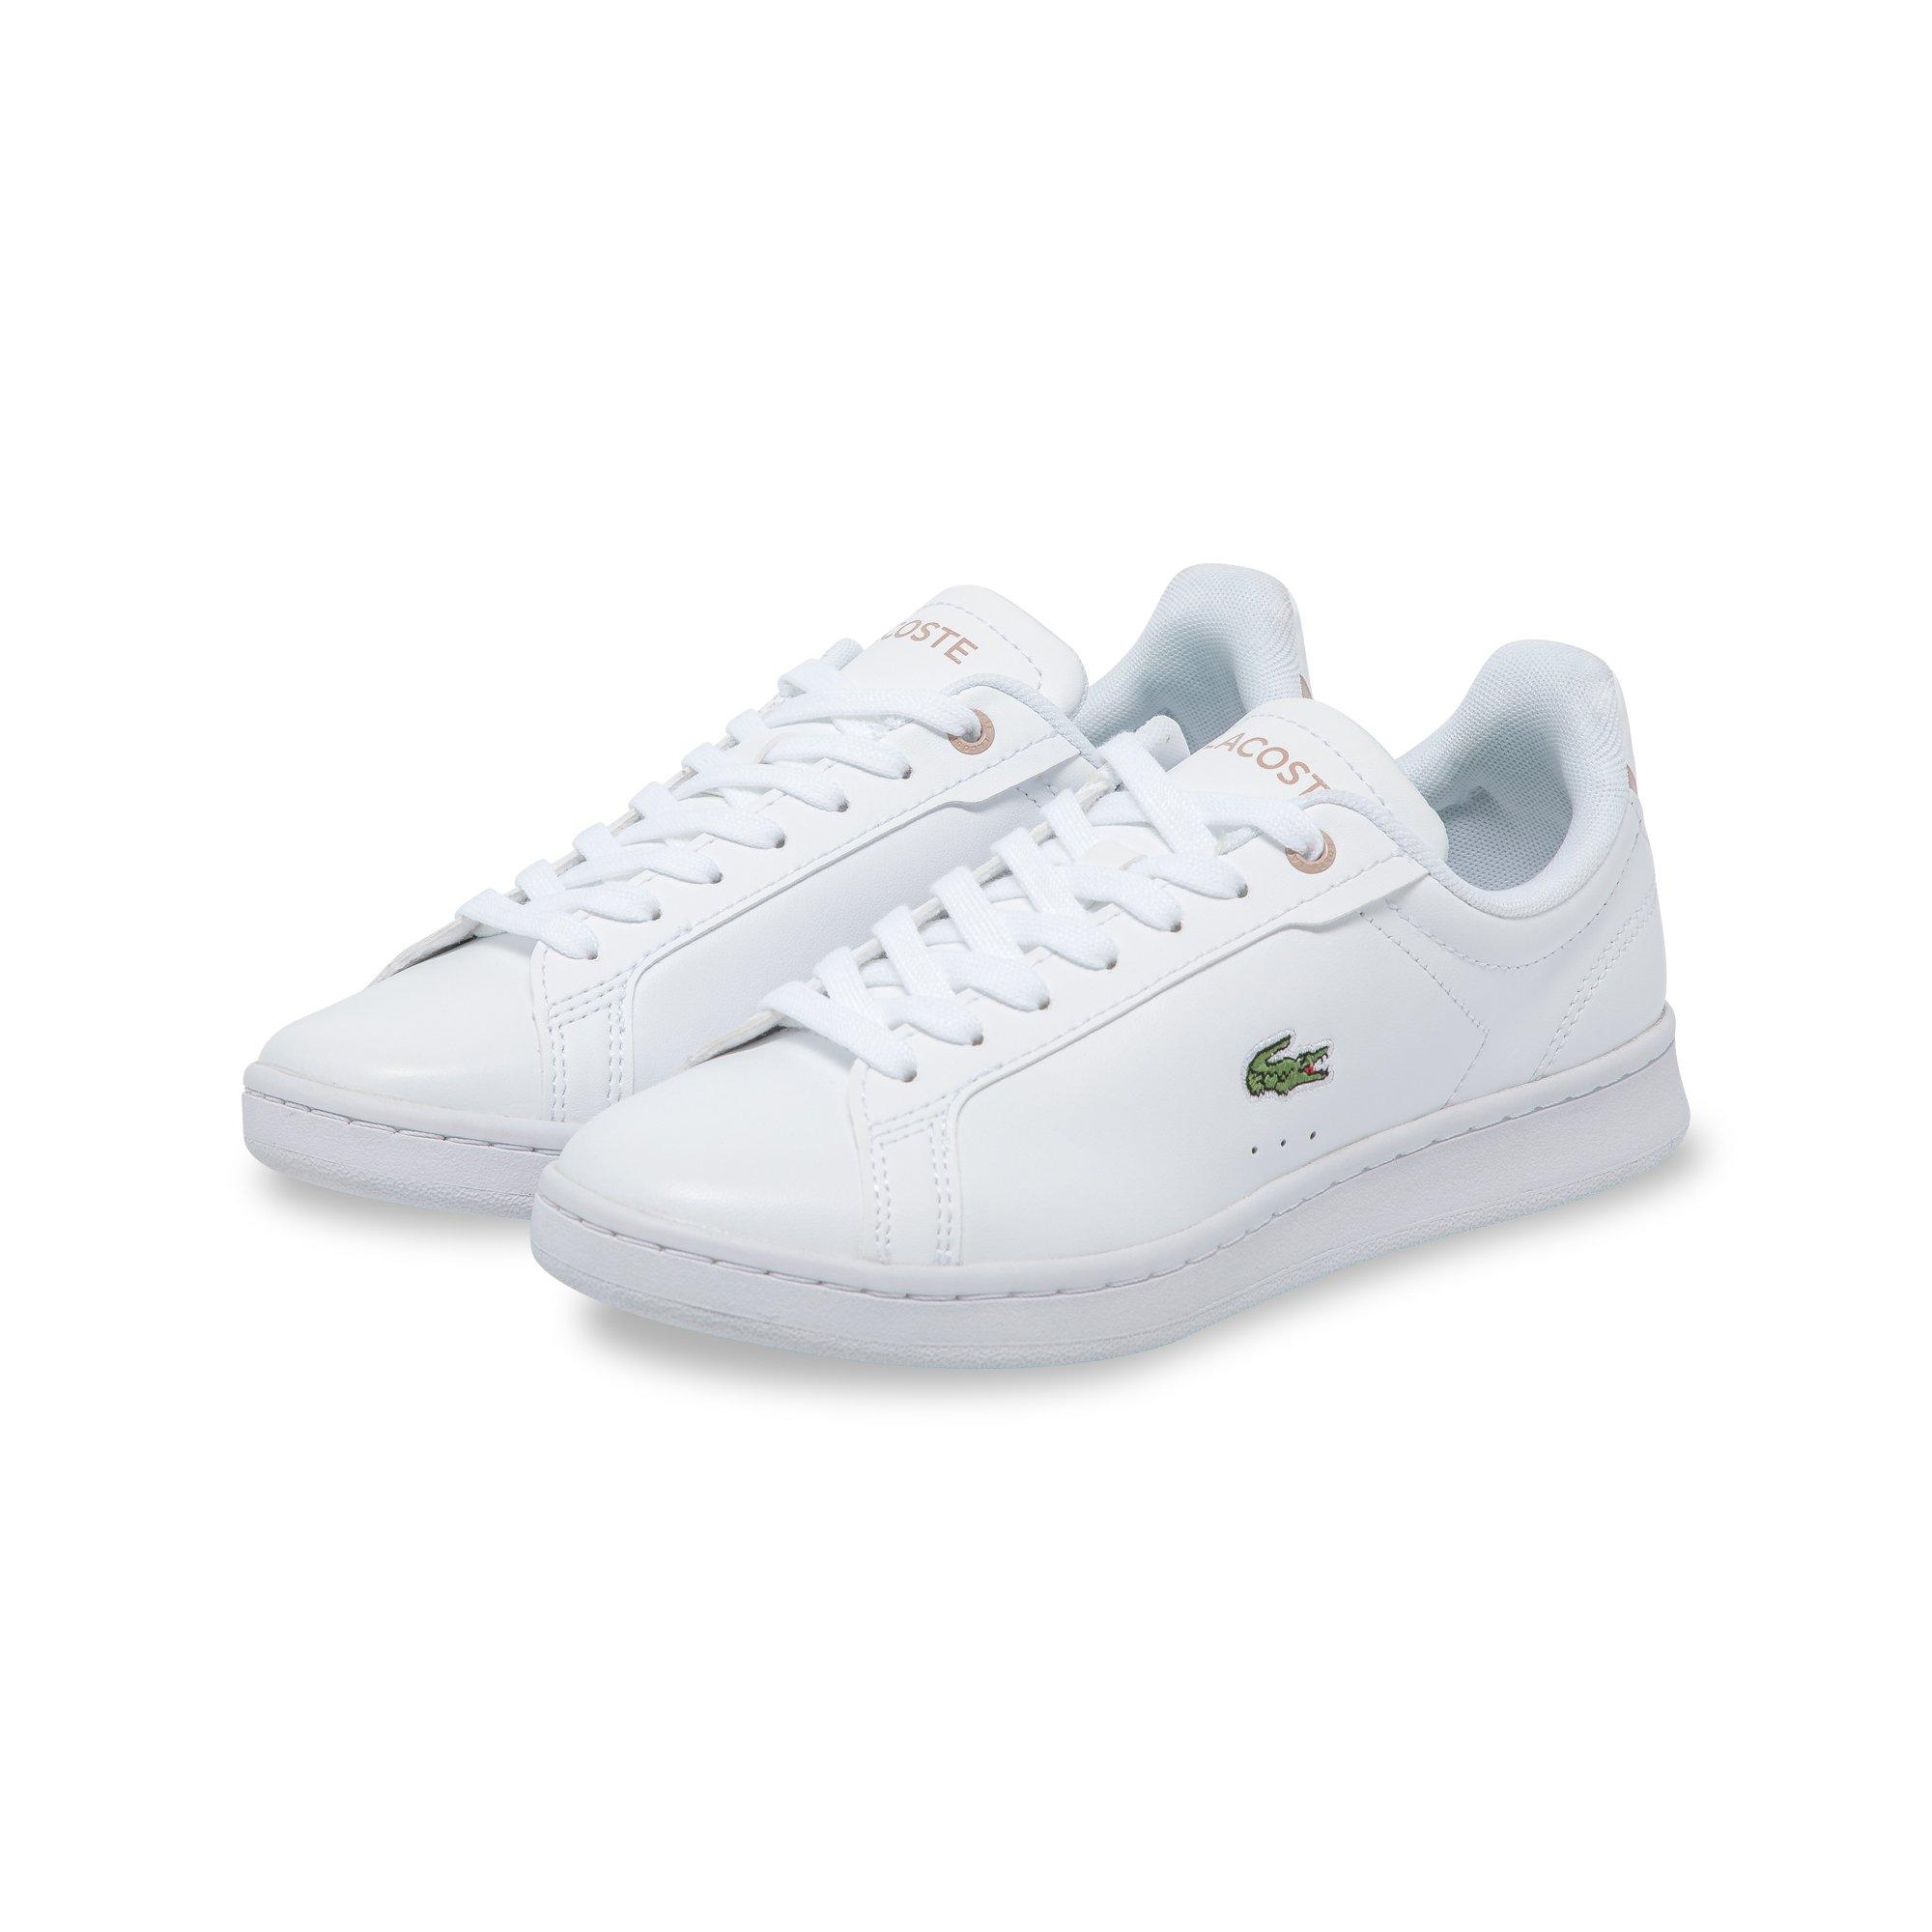 LACOSTE Carnaby Pro W Sneakers, basses 